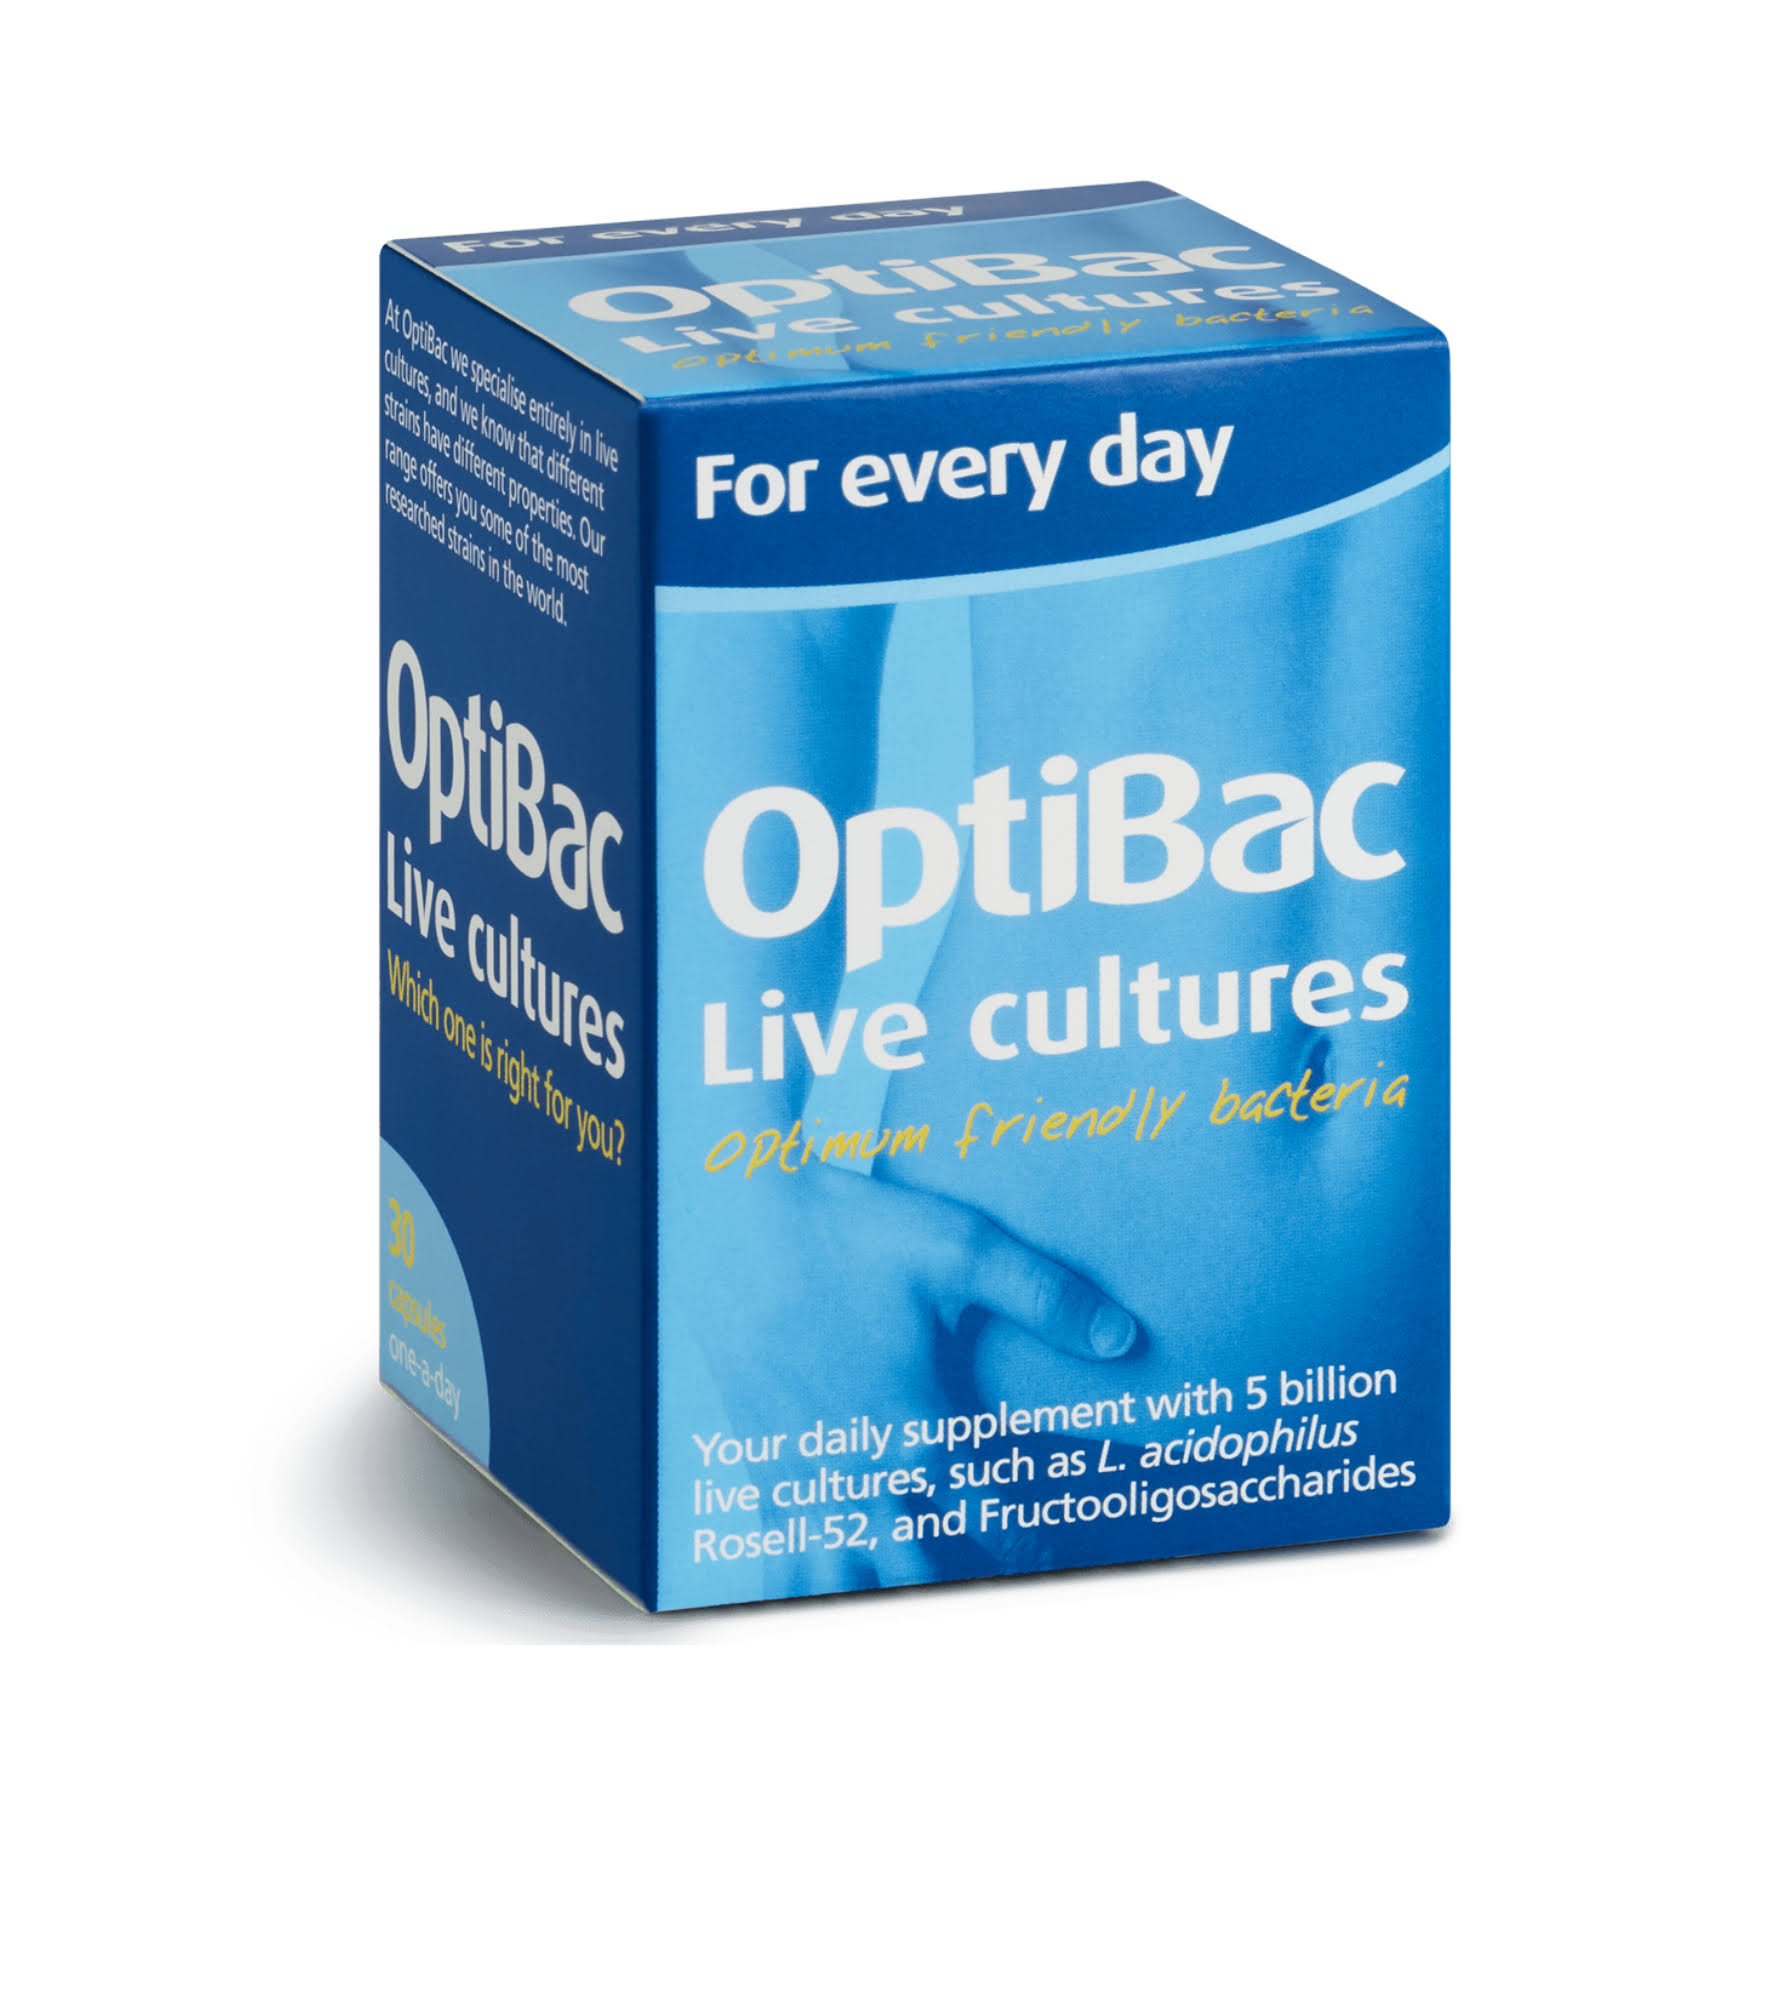 Optibac Probiotics for Daily Wellbeing Capsules - 30ct